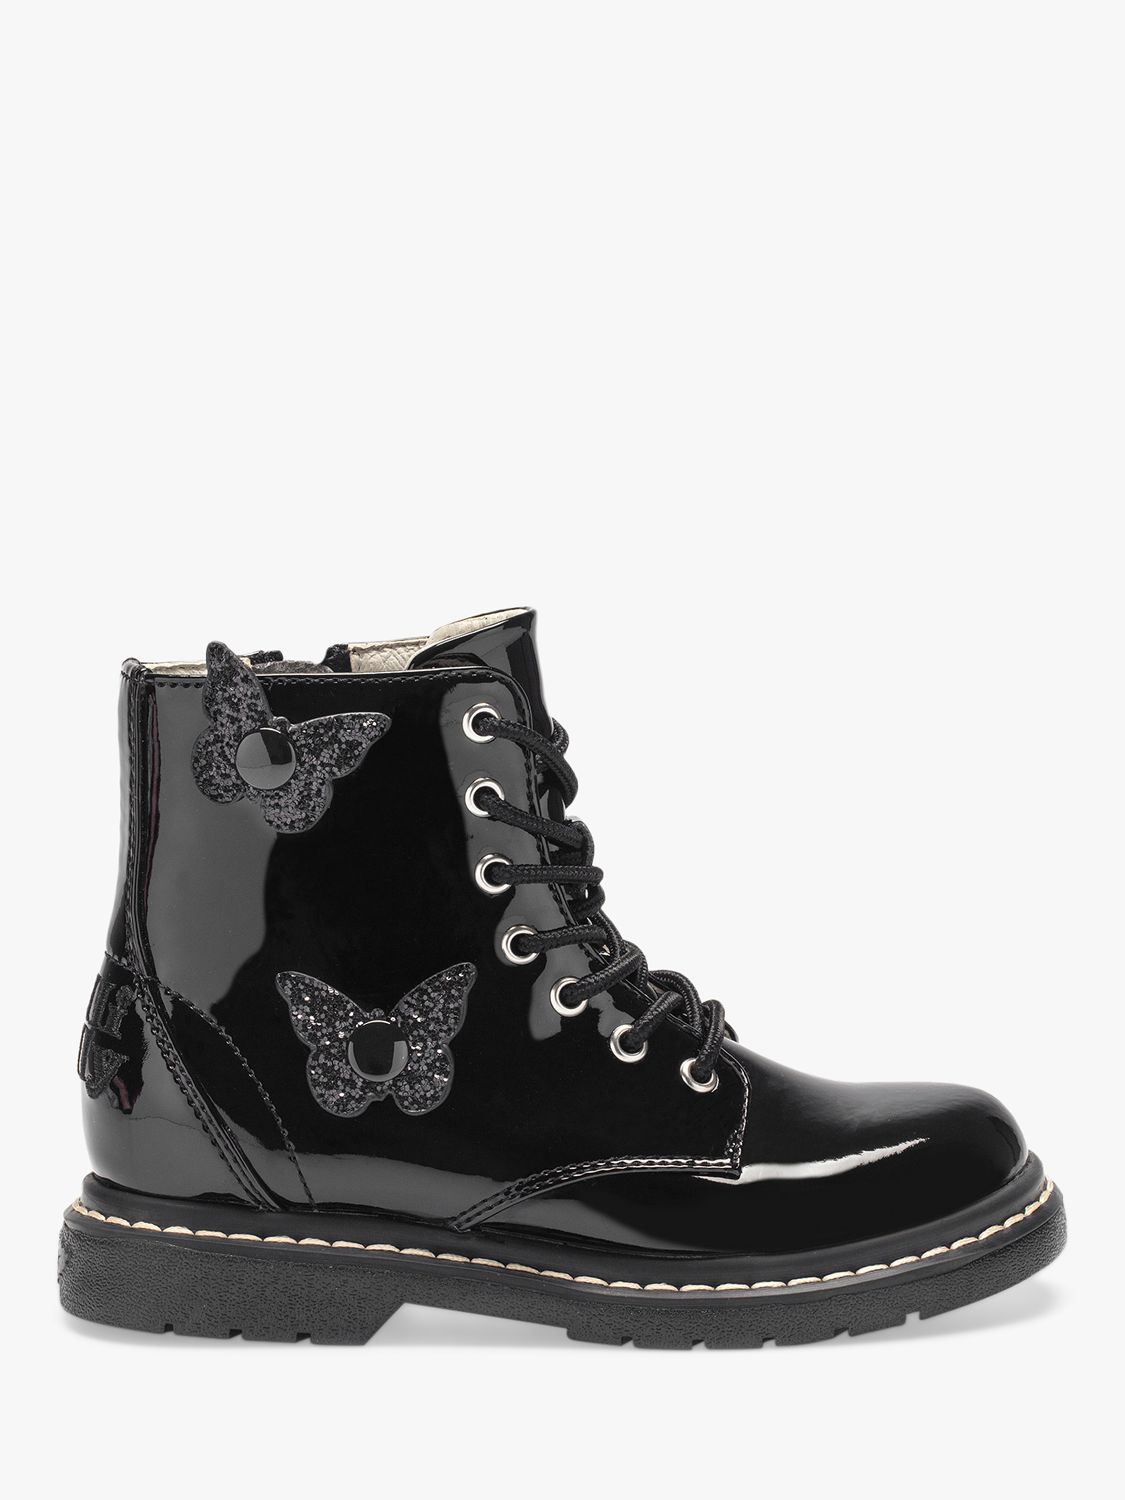 Lelli Kelly Children's Fairy Wings Classic Lace-Up Boots, Black Patent